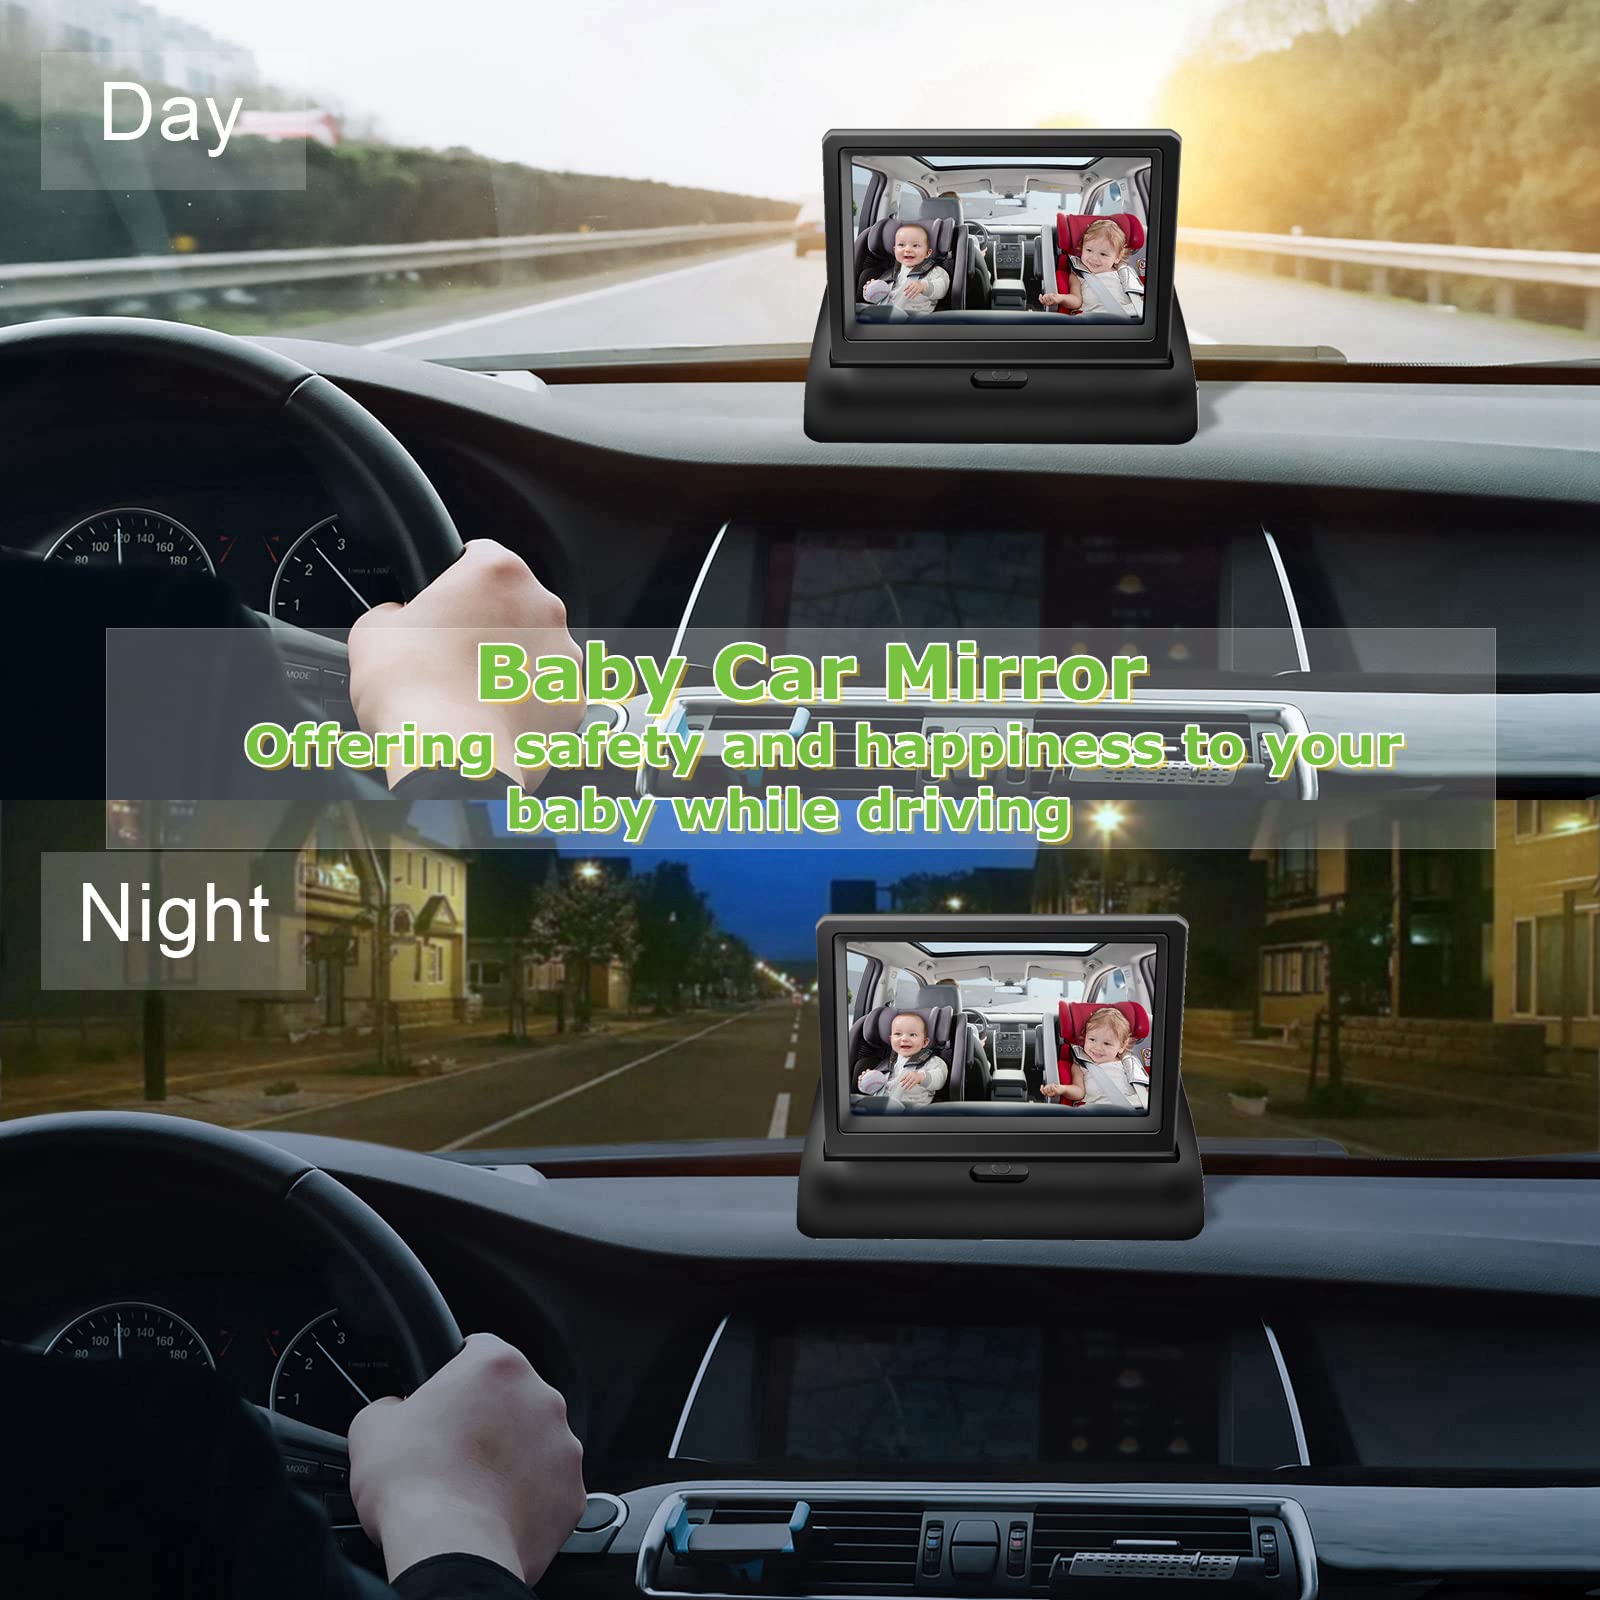 CarThree Baby Car Mirror, 4.3Inch HD Night Vision Car Mirror Display, Safety Car Seat Mirror Camera Monitored Mirror with Wide Crystal Clear View, Easily Observe Baby's Every Movement While Driving